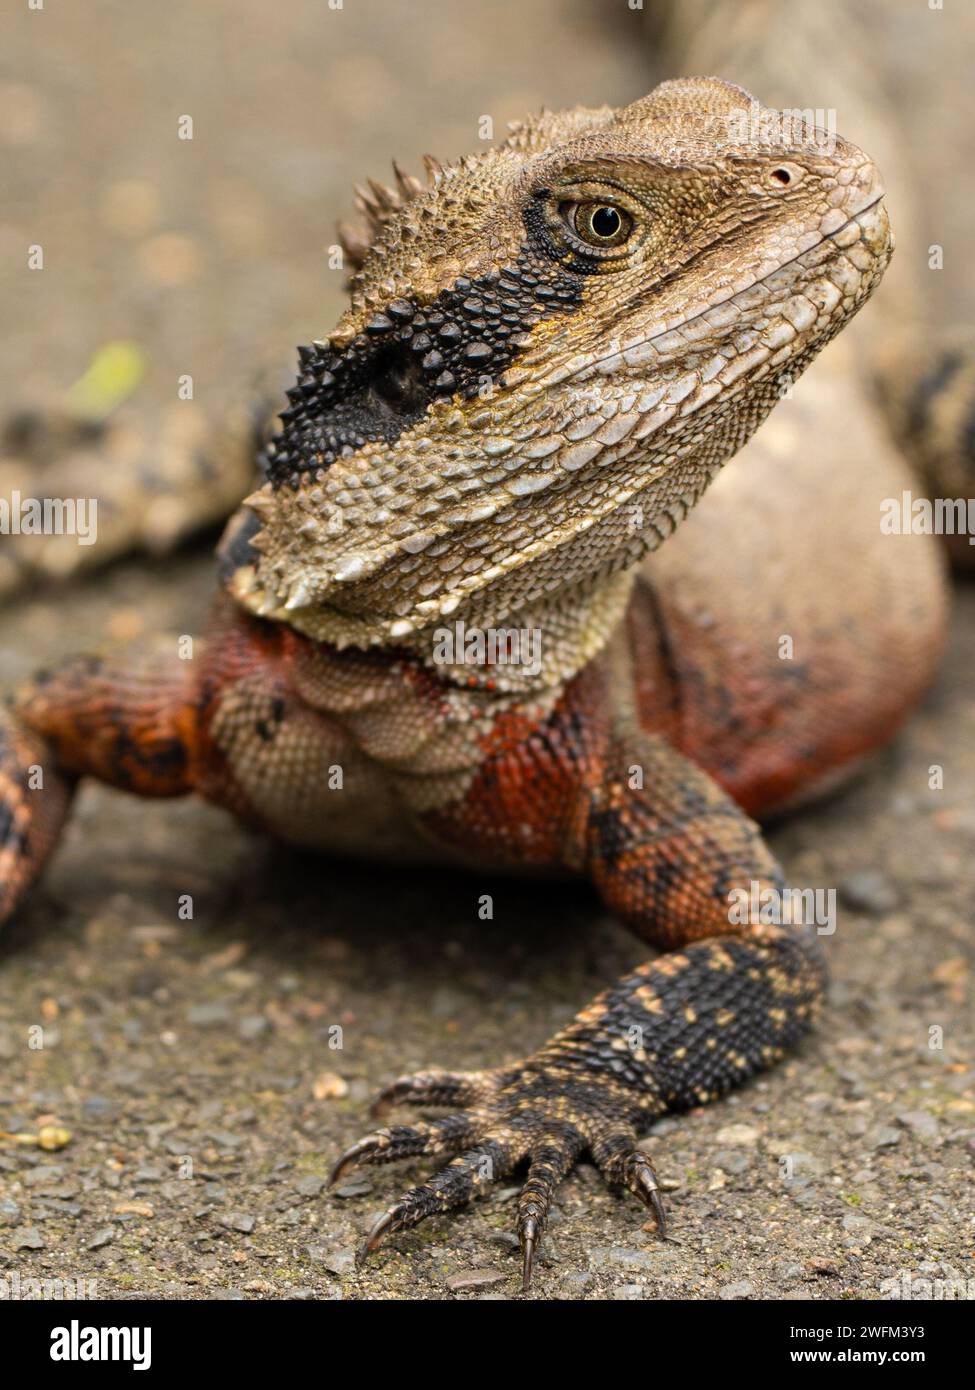 Water Dragon close-up profile view Stock Photo